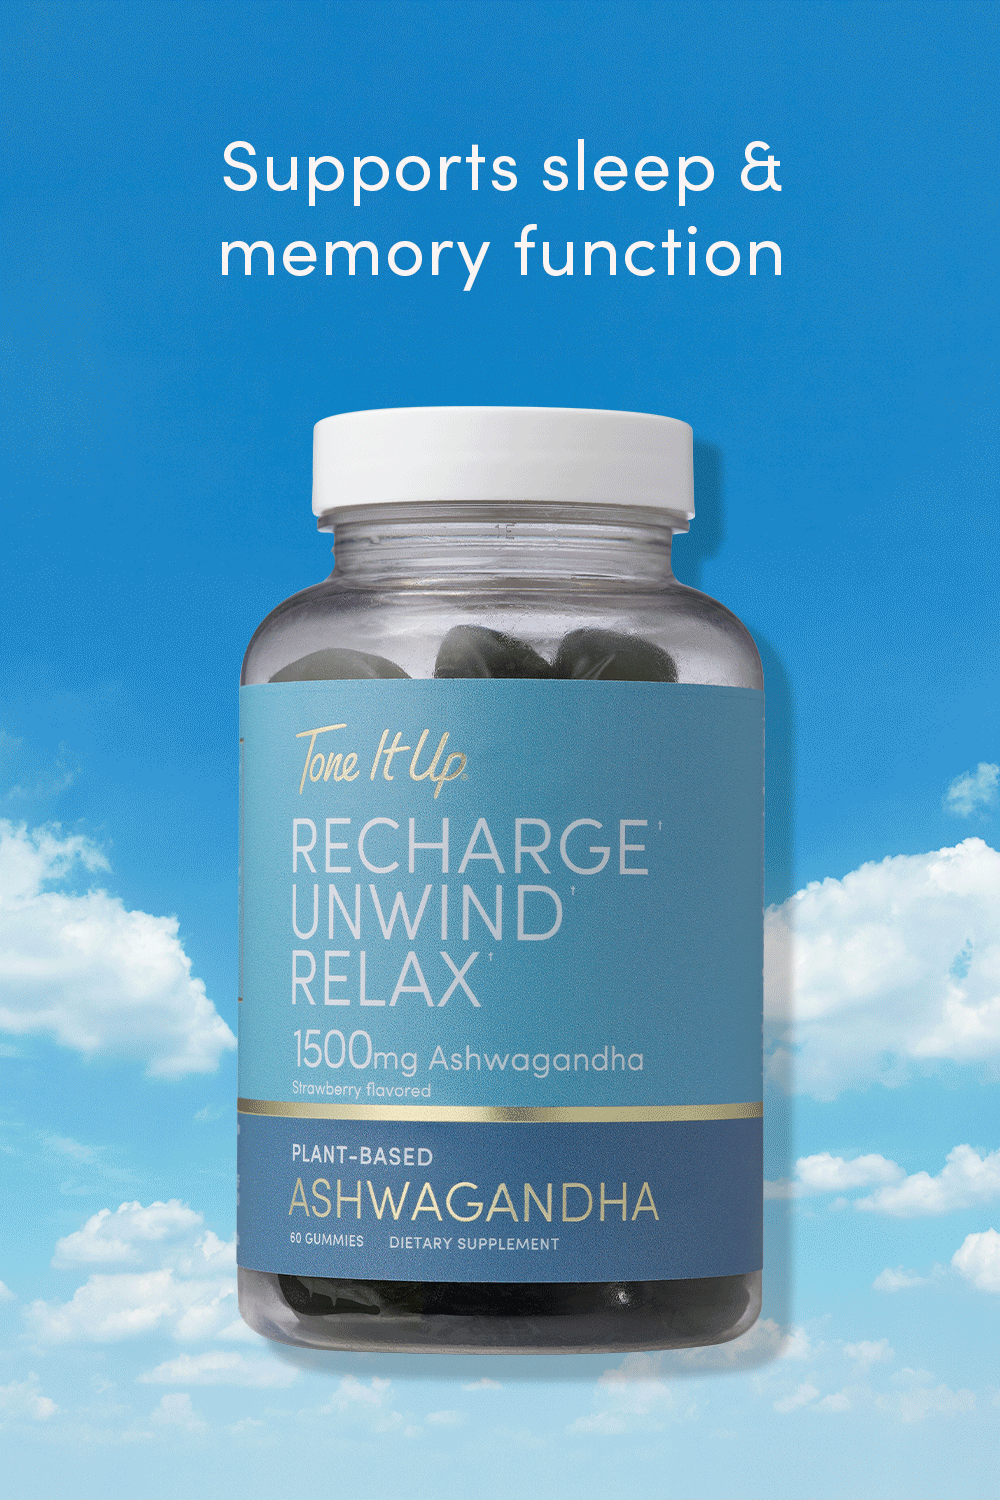 Channel your inner zen with Tone It Up Ashwagandha gummies.  Ashwagandha can be used as a natural hack to combat stress, anxiety, and fatigue. It also supports memory function and sleep 